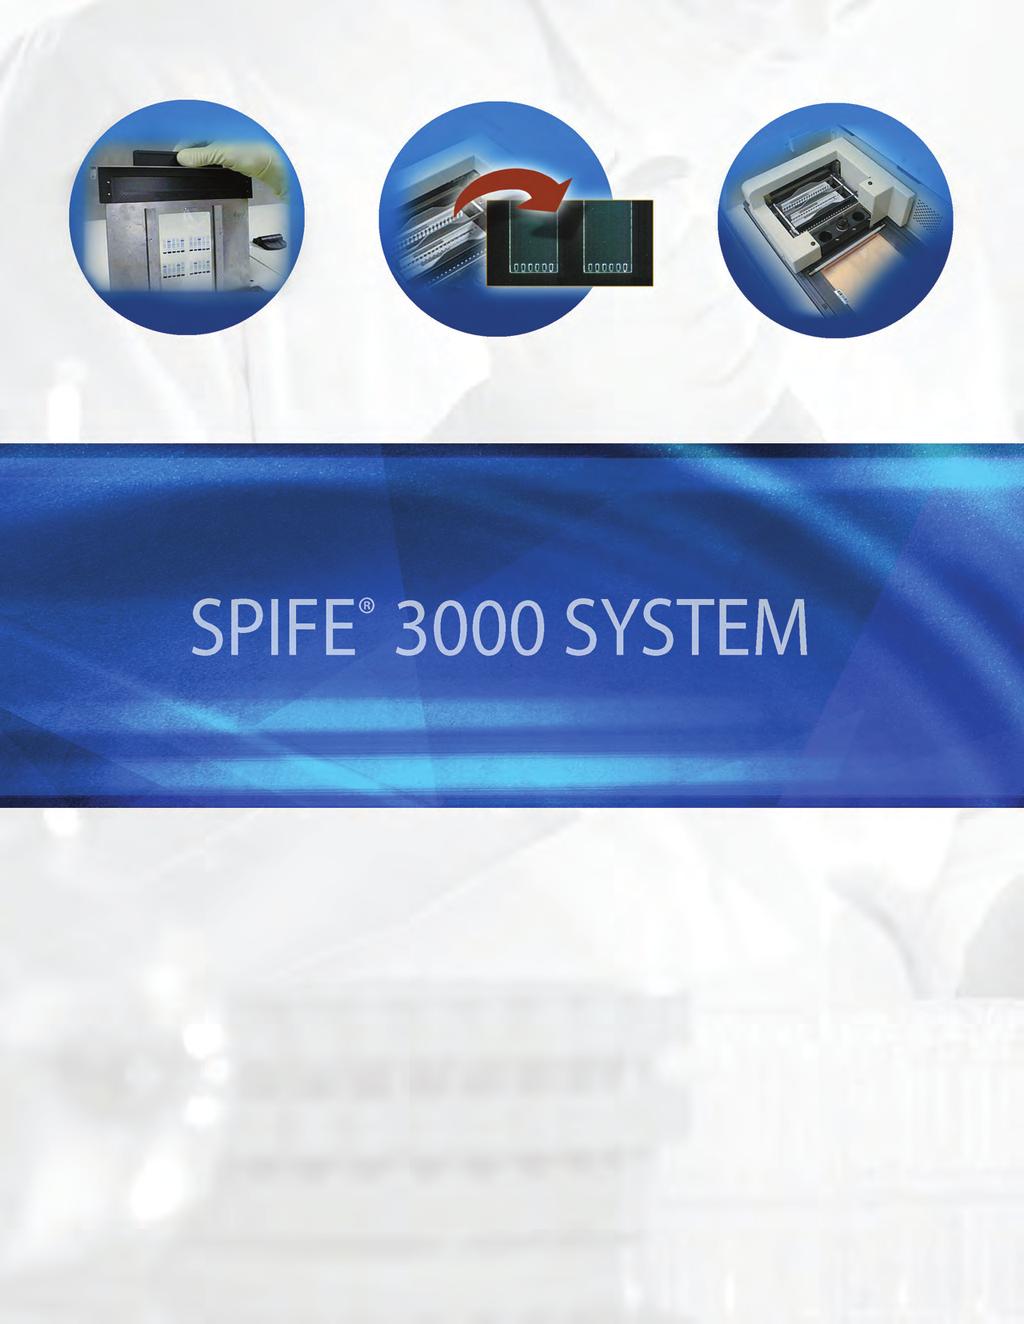 Designed with You in Mind The SPIFE 3000 system provides the automation busy labs need for separation and staining of visible electrophoretic analytes.